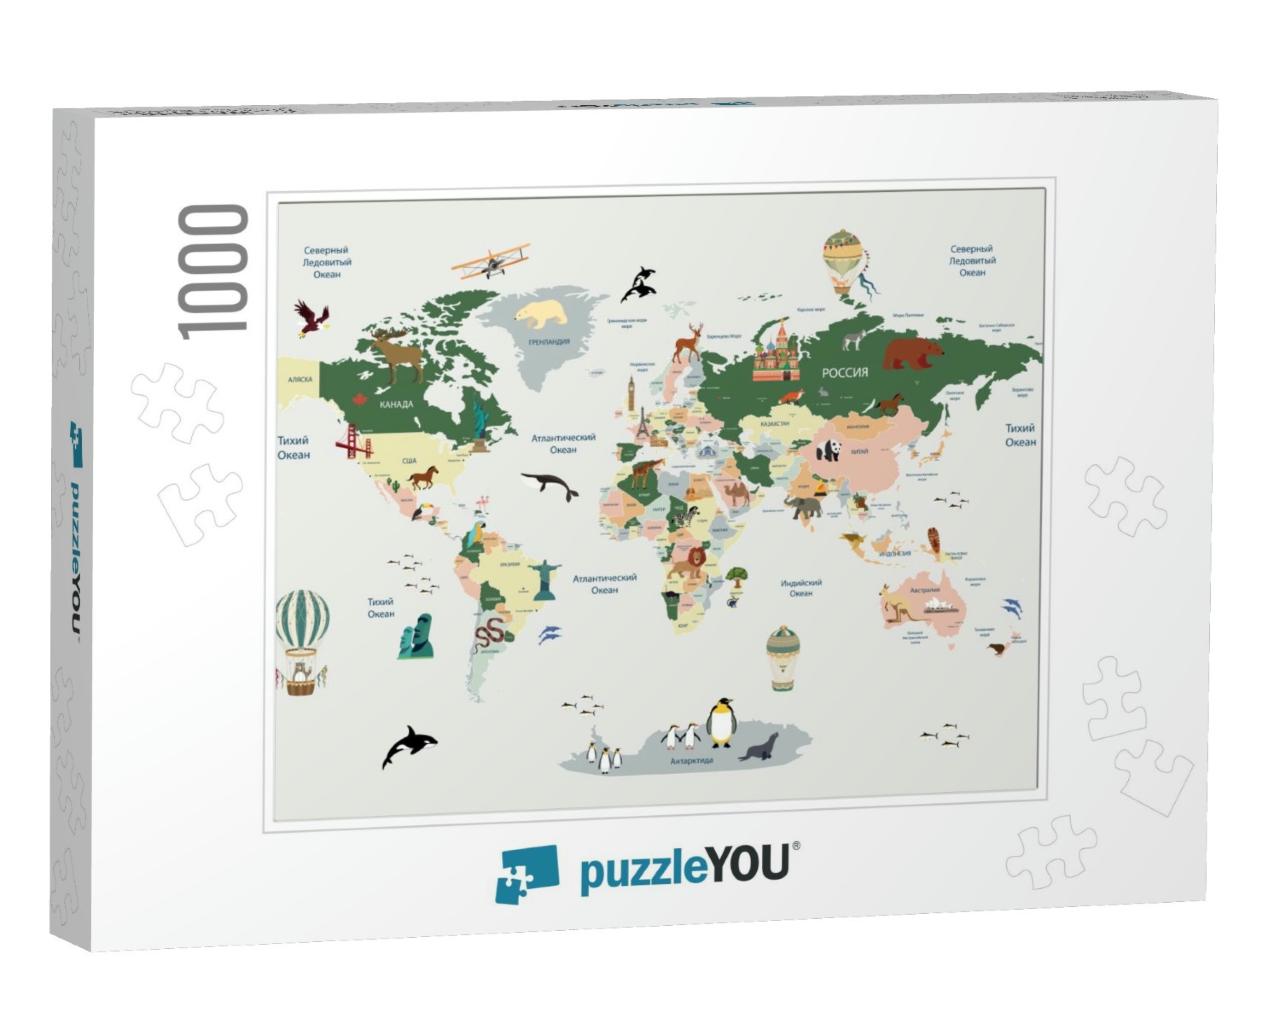 Children's Map of the World with Sights Detailed... Jigsaw Puzzle with 1000 pieces